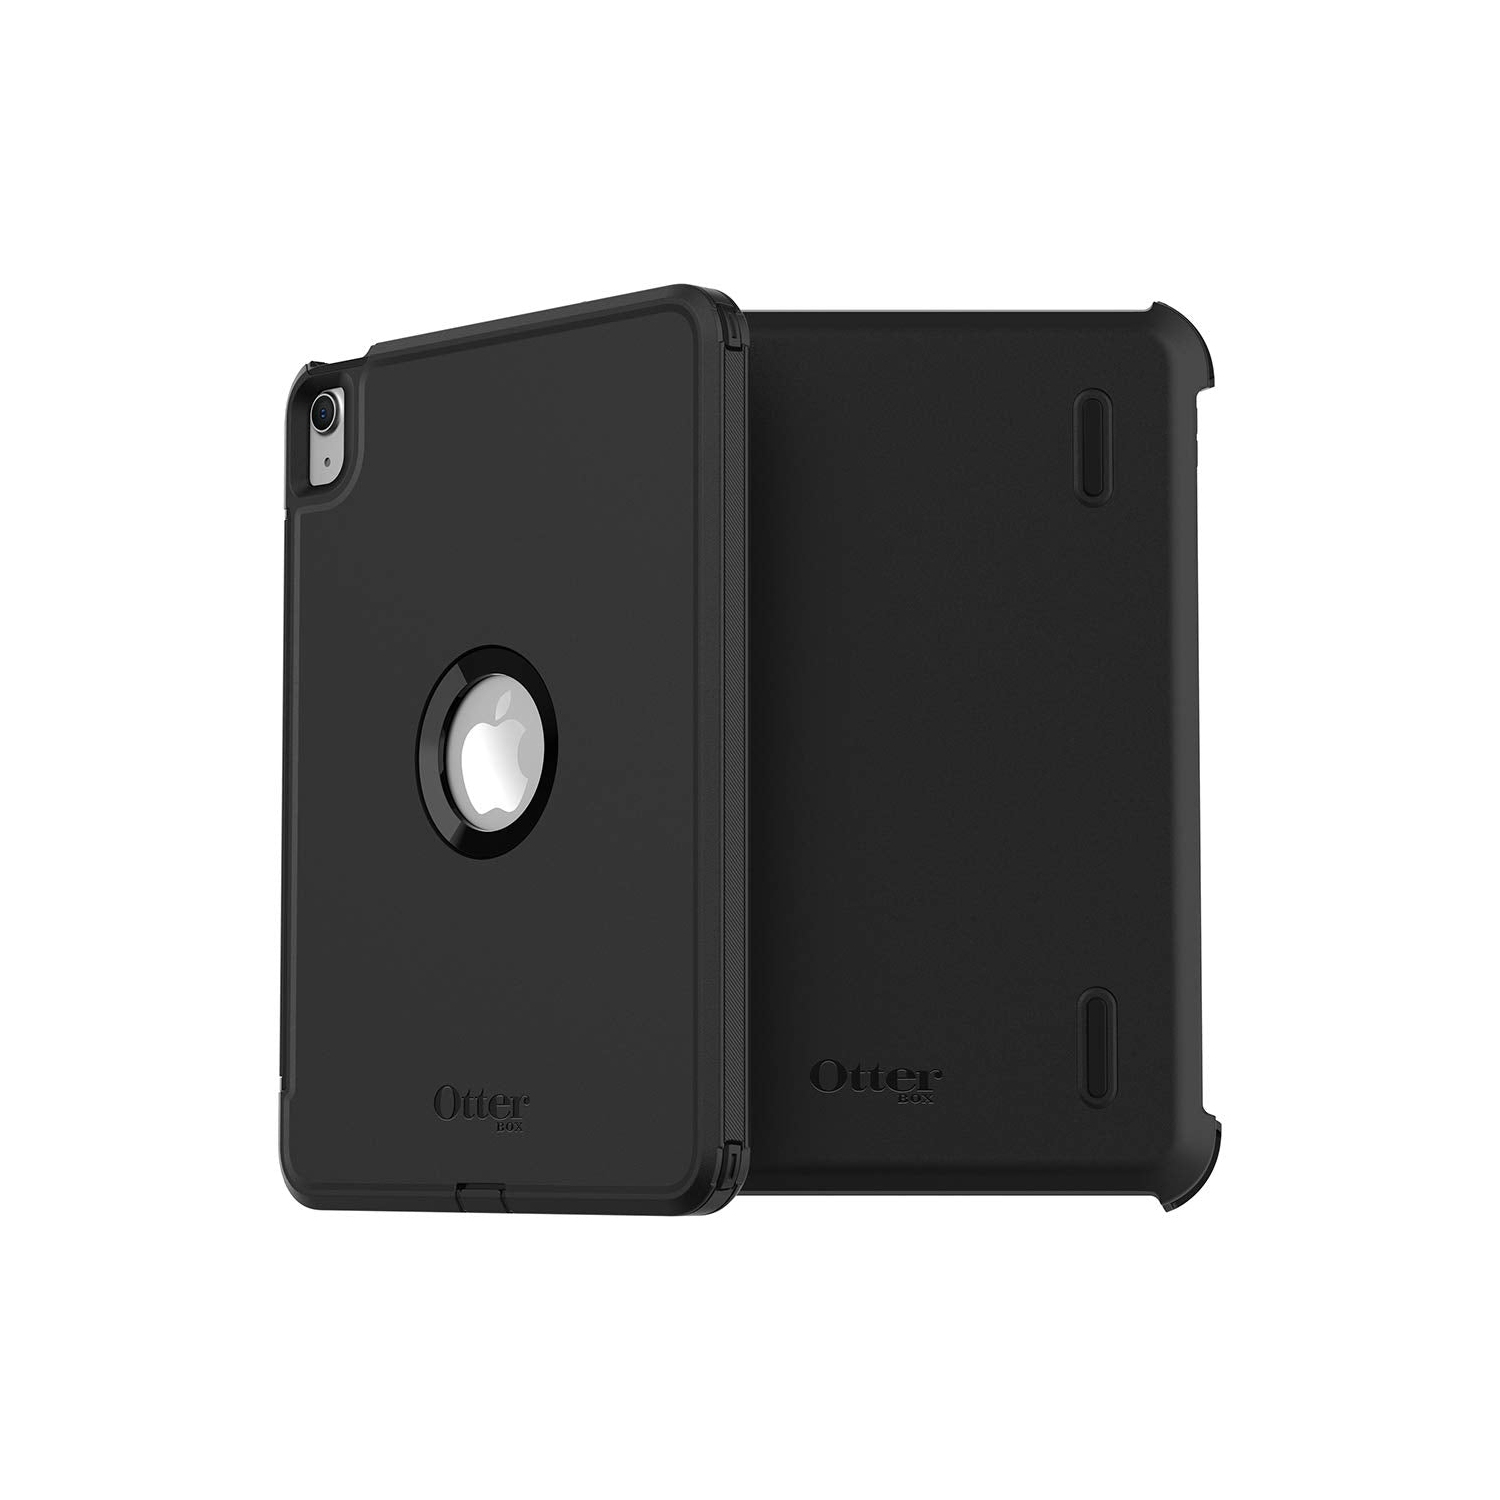 OTTERBOX Defender Series Case for iPad Air (4th & 5th Gen) - Non-Retail/Ships in Polybag - Black